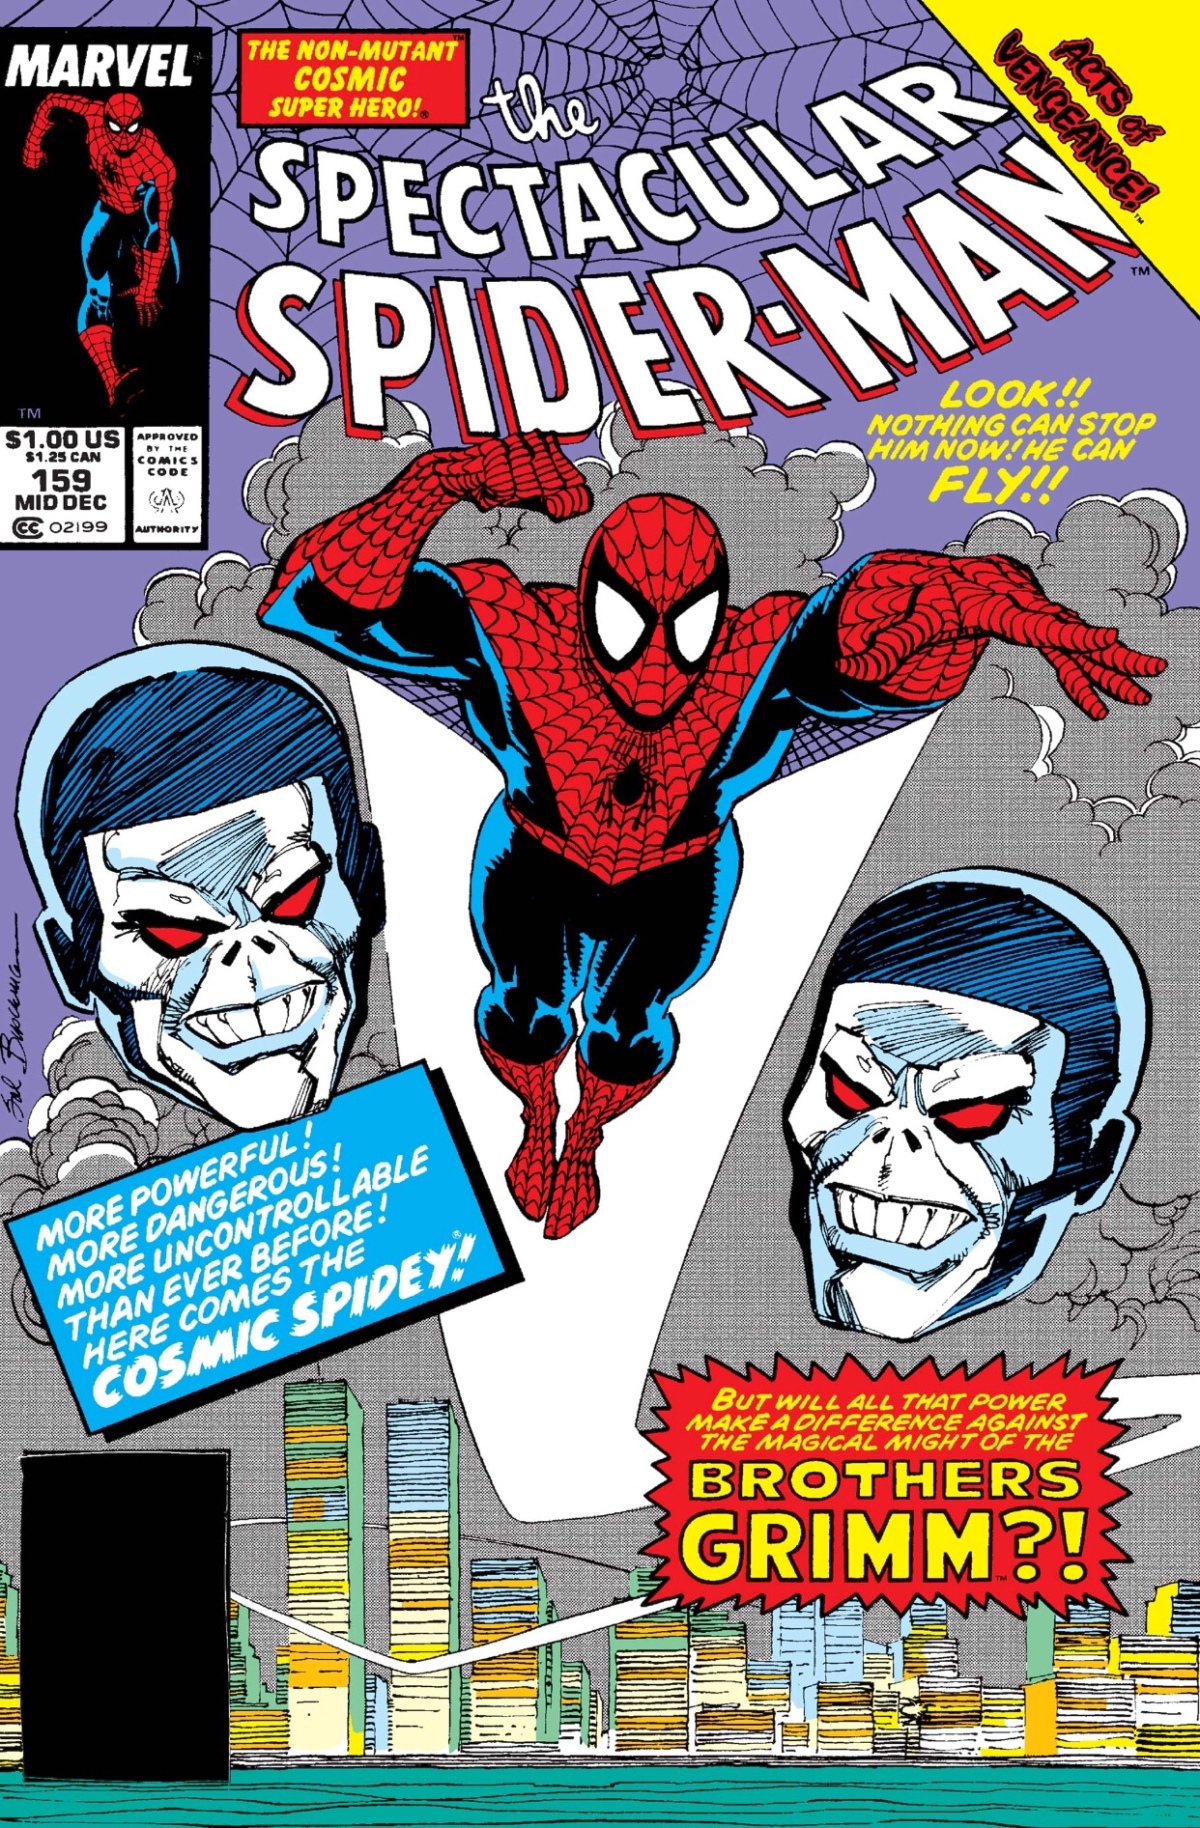 Cosmic Powered Spectacular Spider-Man vs. The Brothers Grimm (Spectacular Spider-Man #159, 1989)